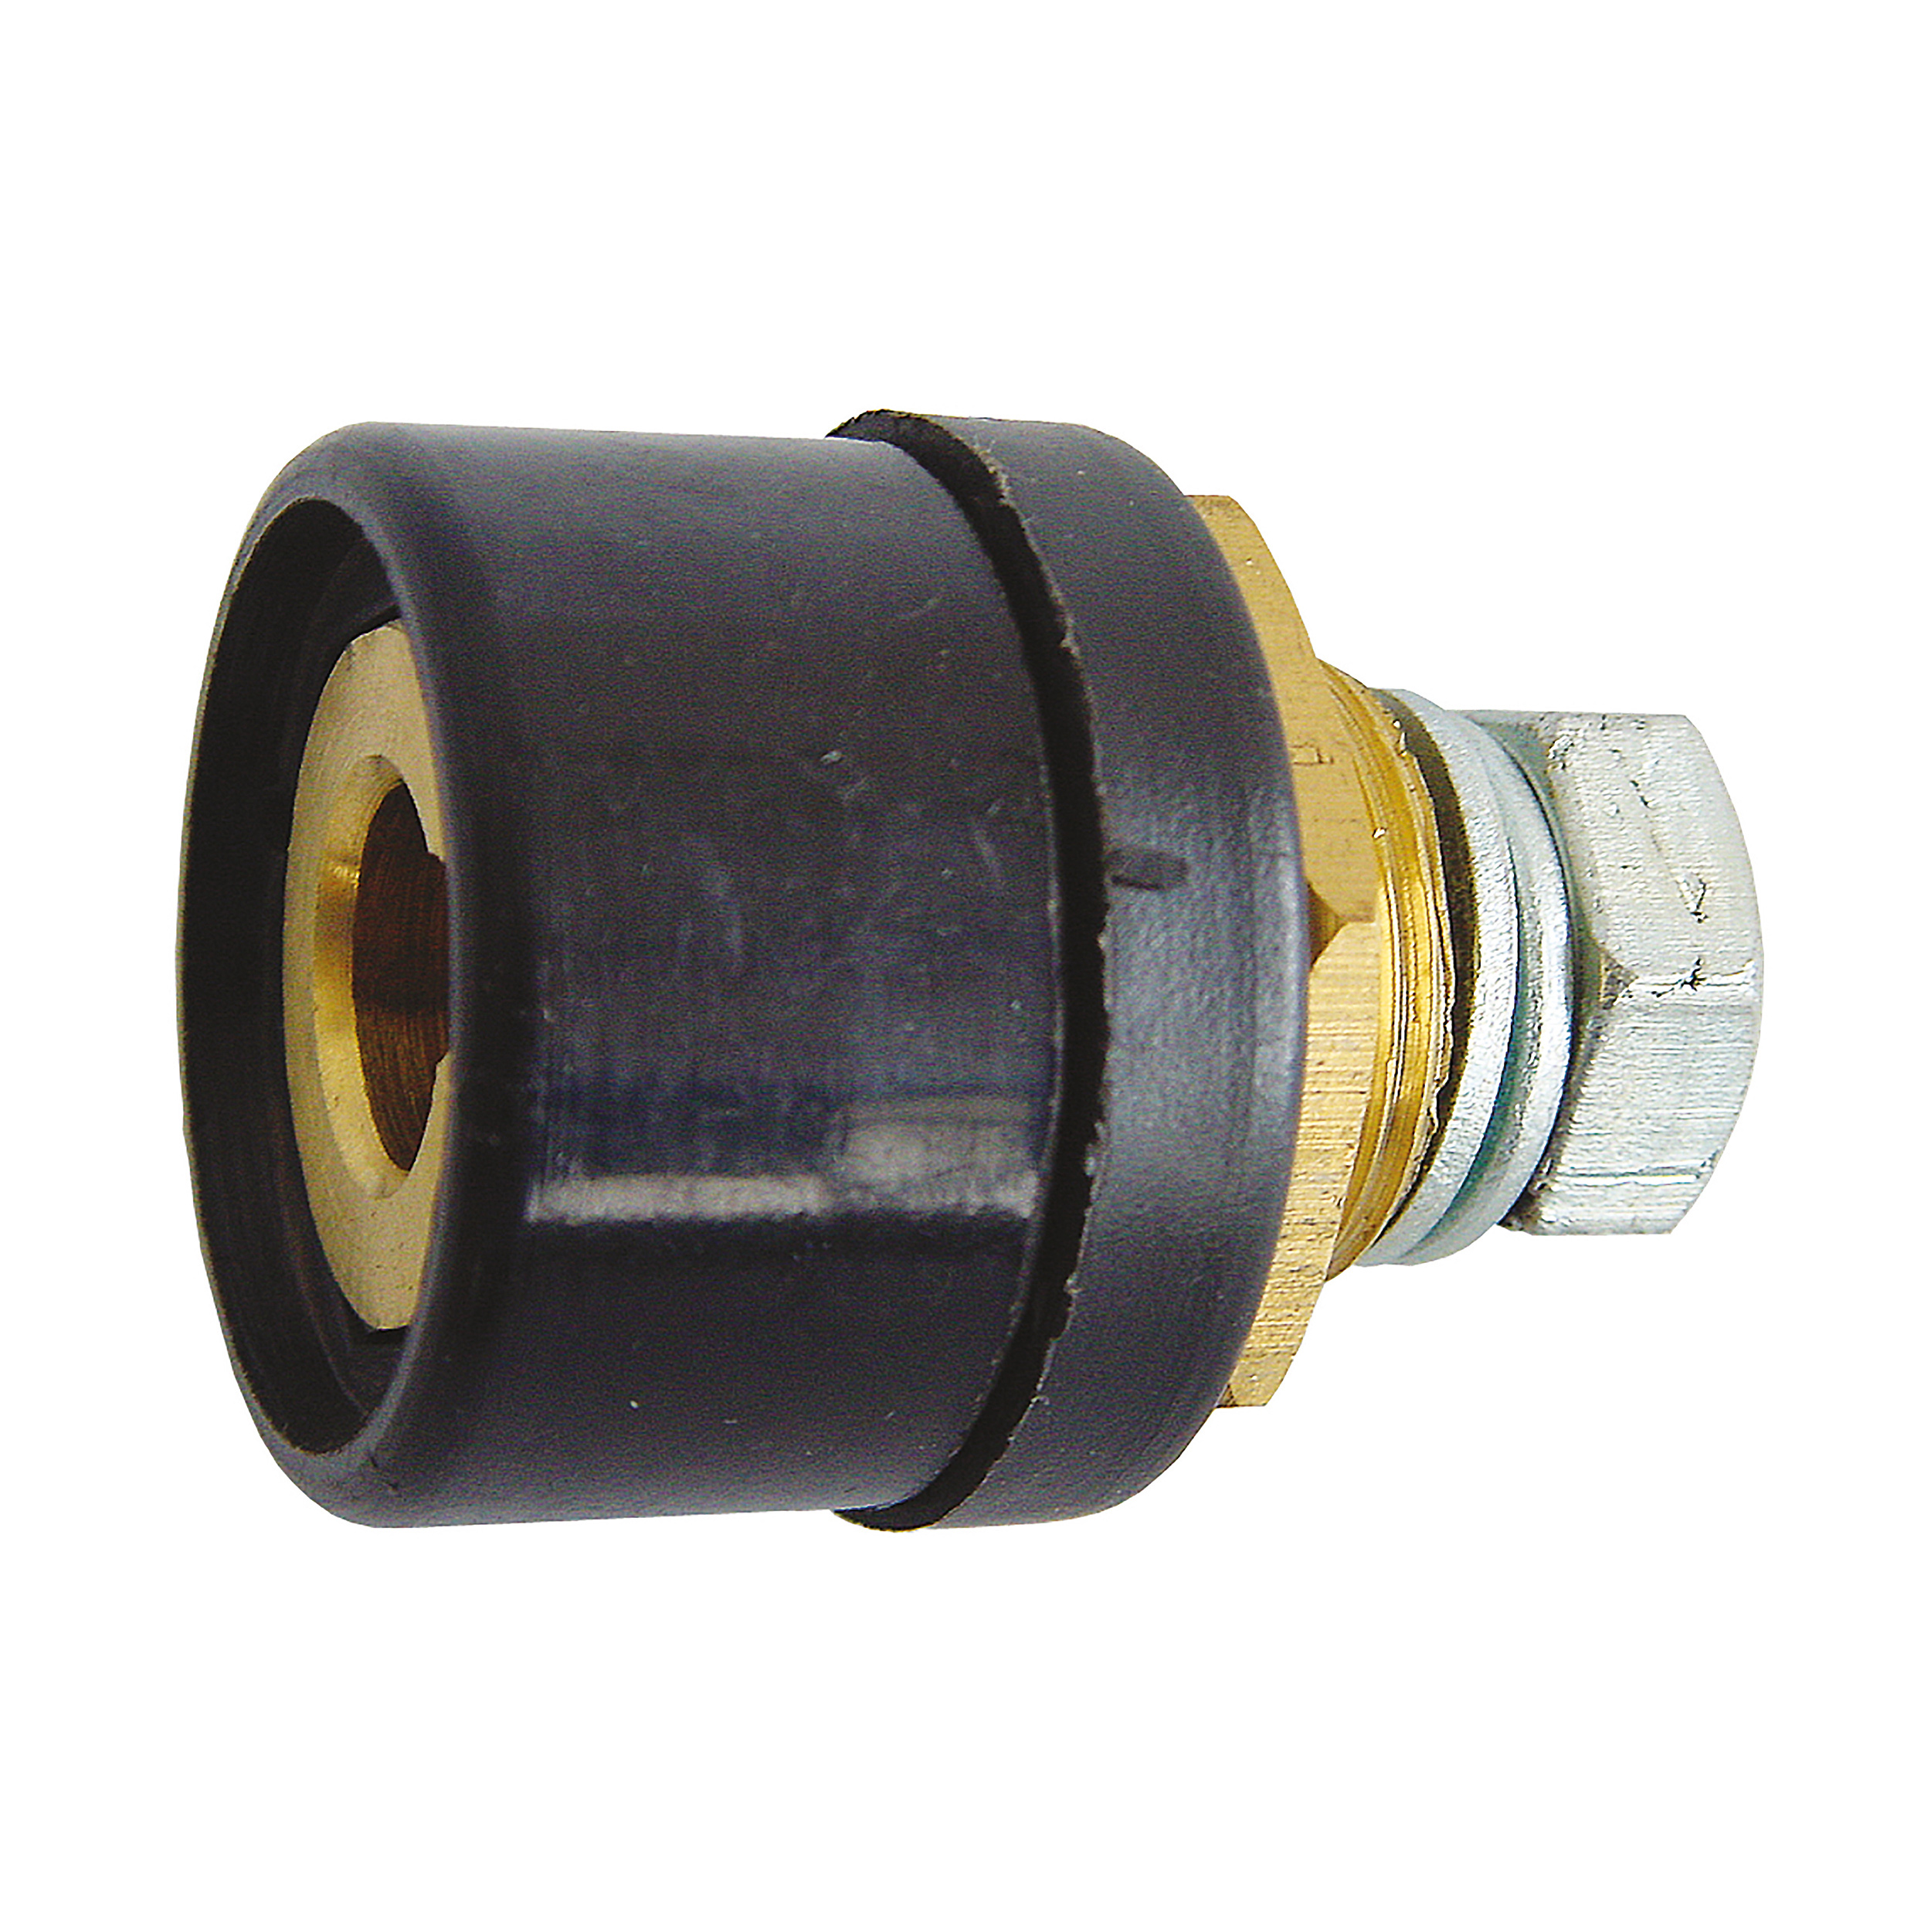 Cable coupling, built-in socket